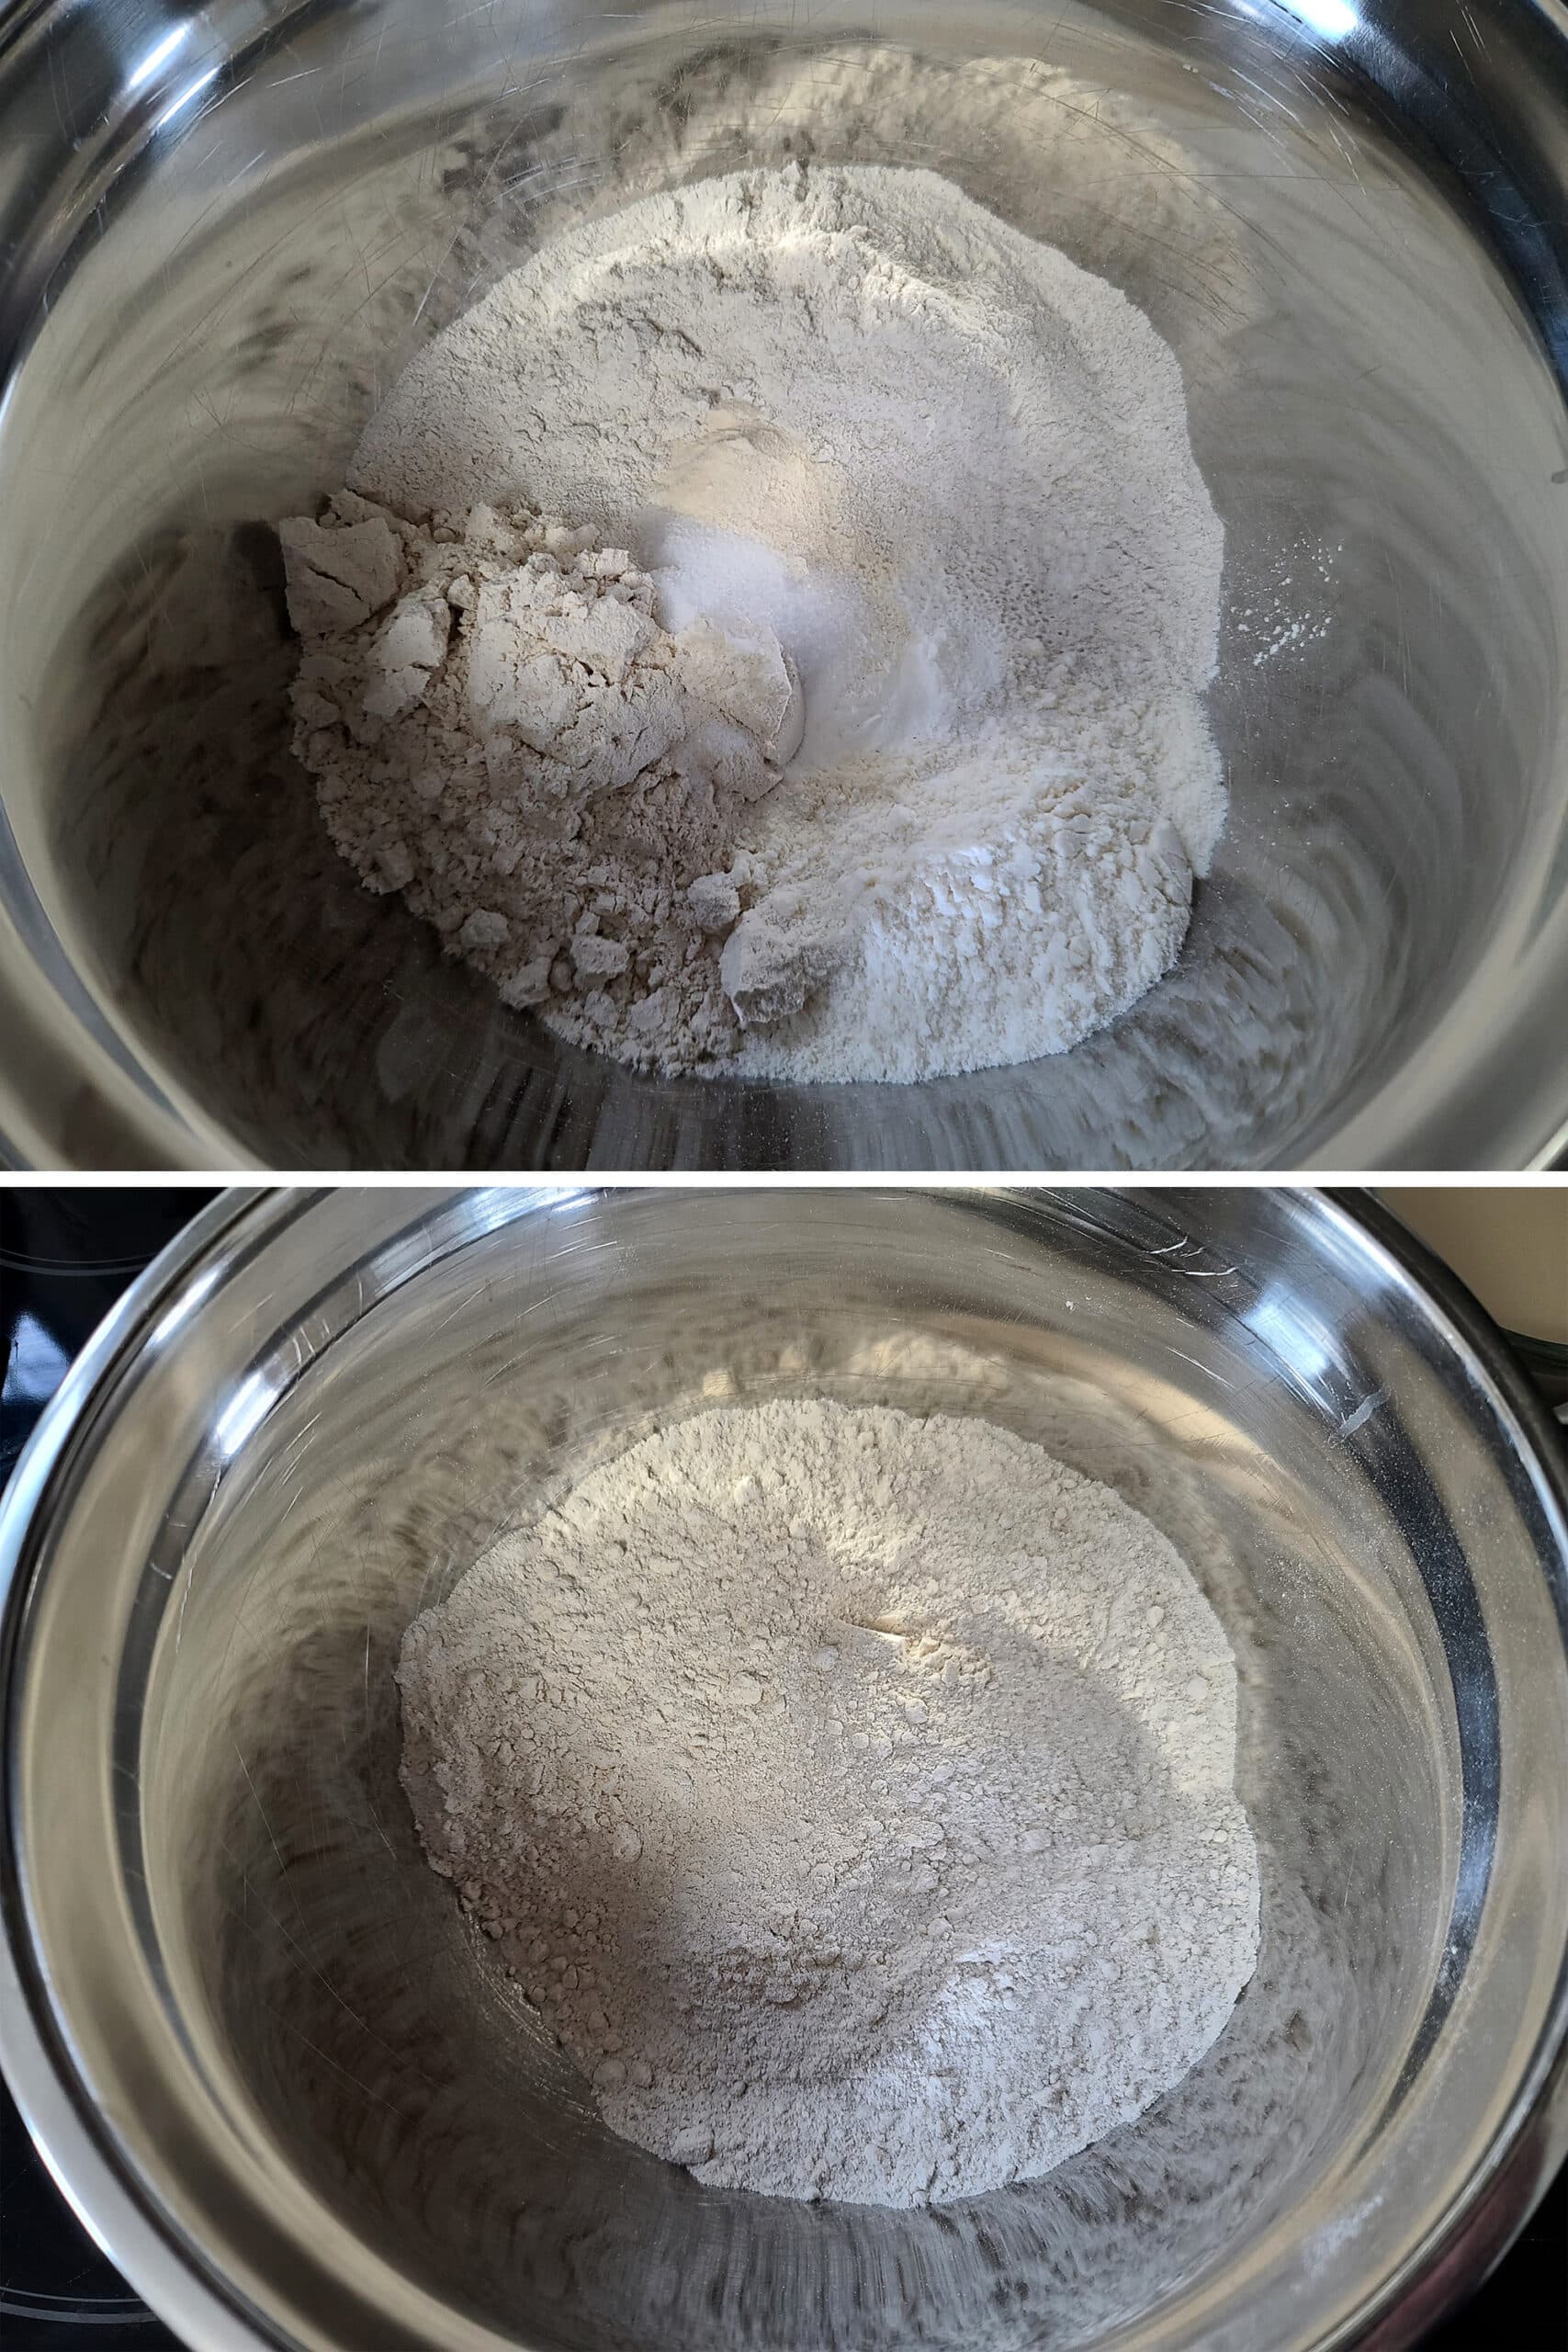 A 2 part image showing the dry ingredients being mixed in a metal bowl.